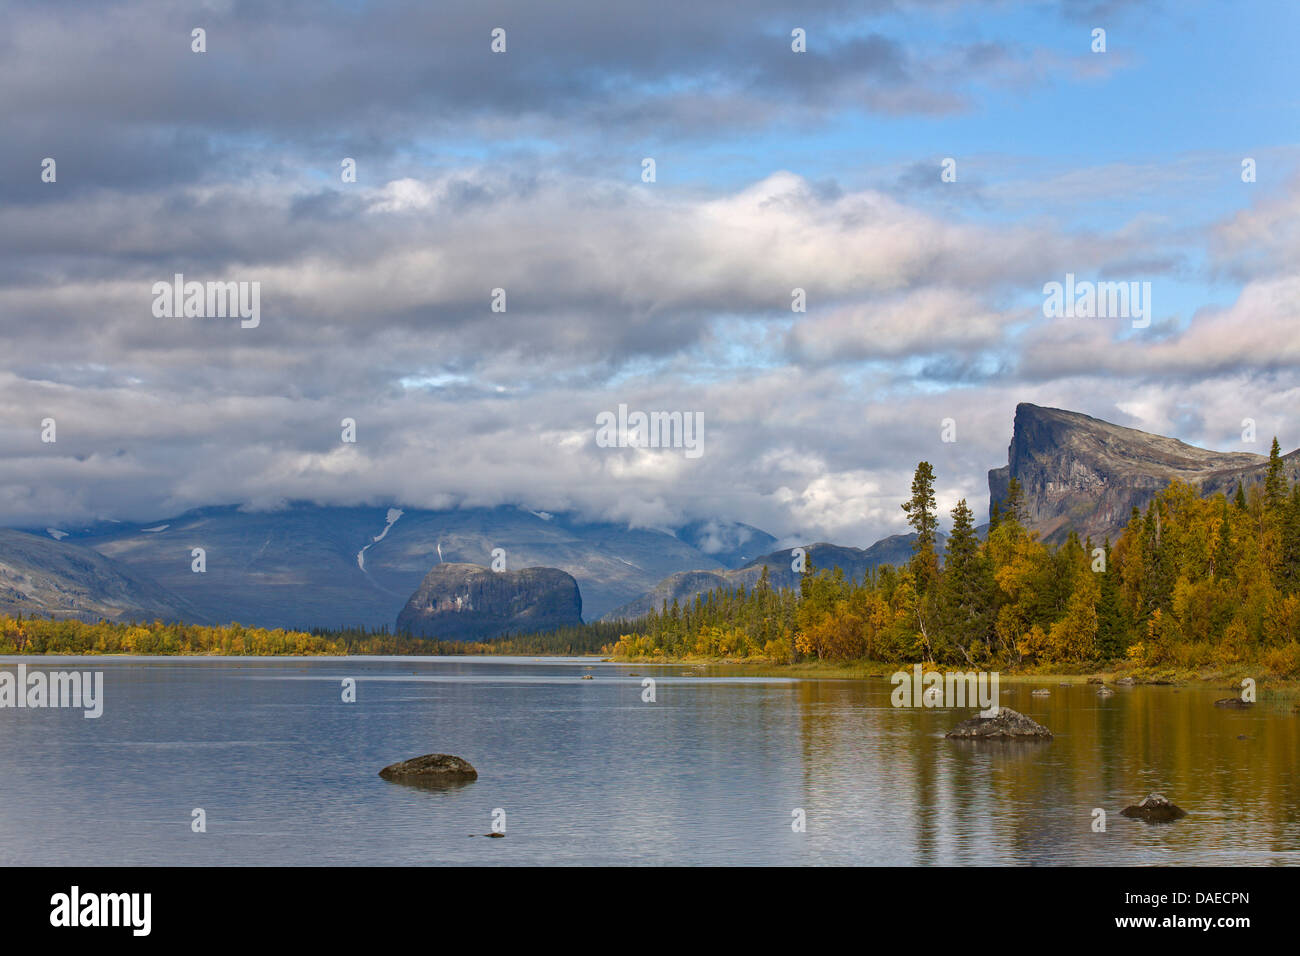 fjell landscape with Laitaure lake and the mountains Tjakelli, Nammatj and Skierffe , Sweden, Lapland, Sarek National Park, Norrbottens Laen Stock Photo